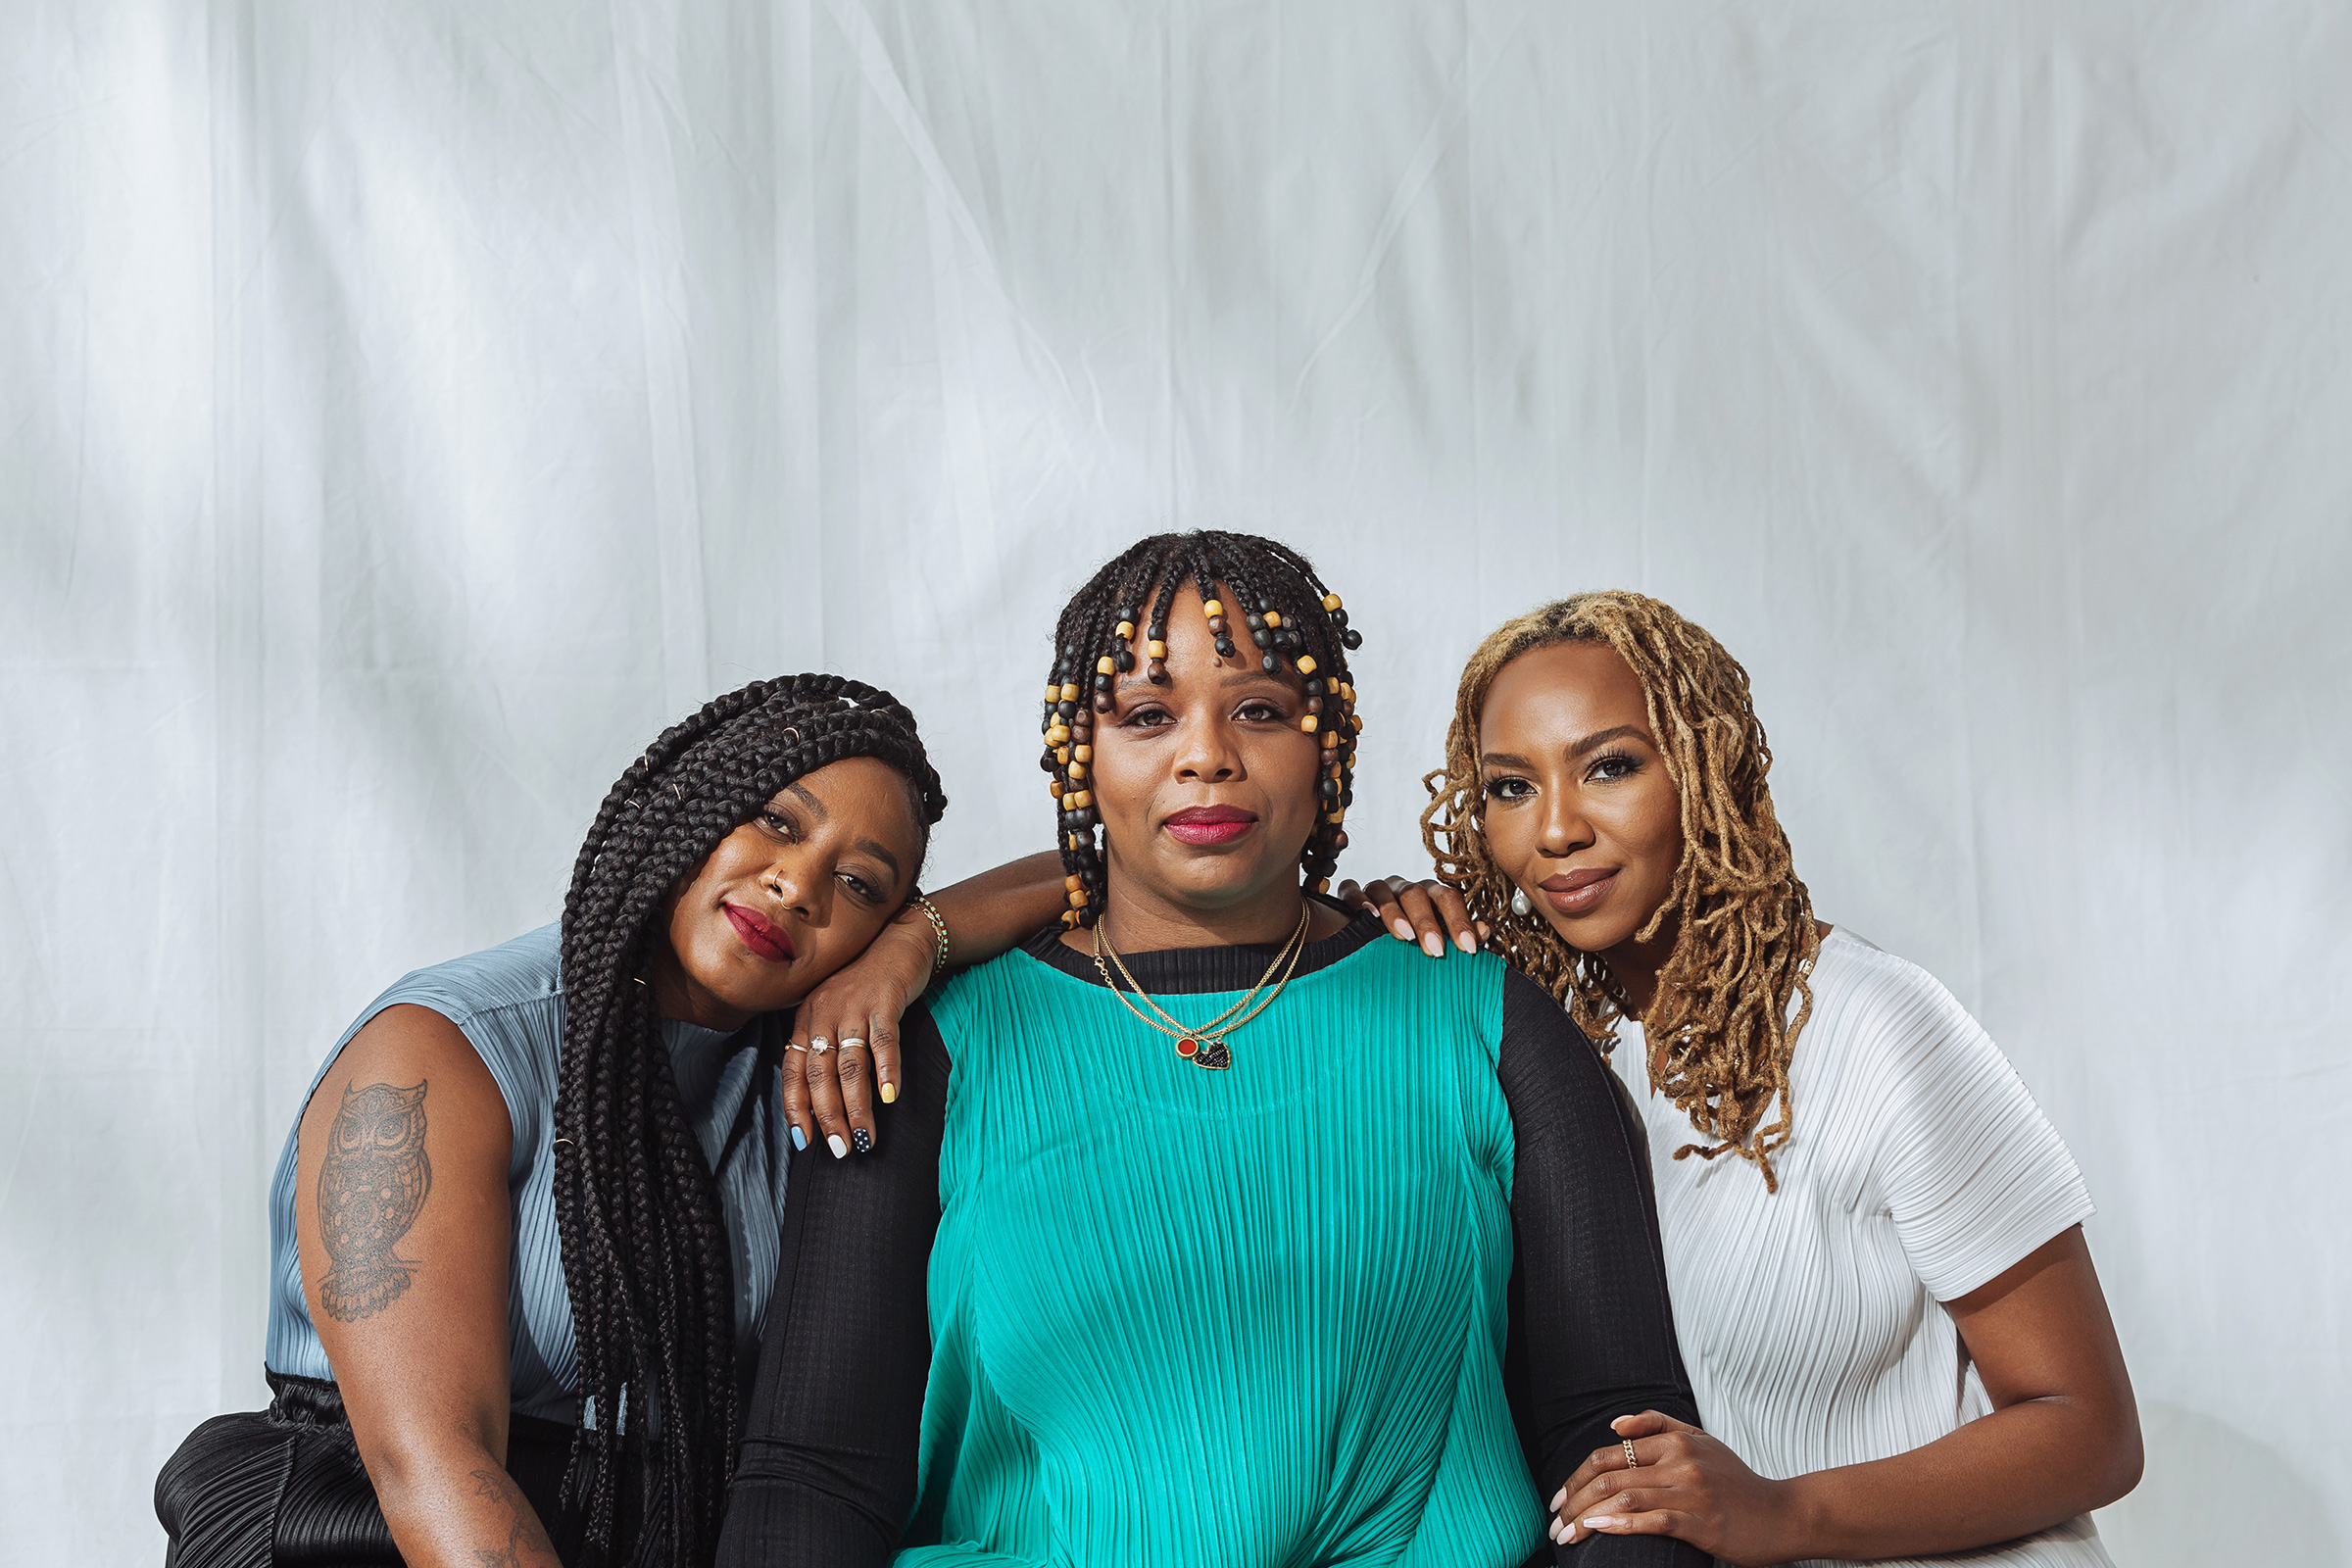 Black Lives Matter founders: Alicia Garza, Patrisse Cullors and Opal Tometi